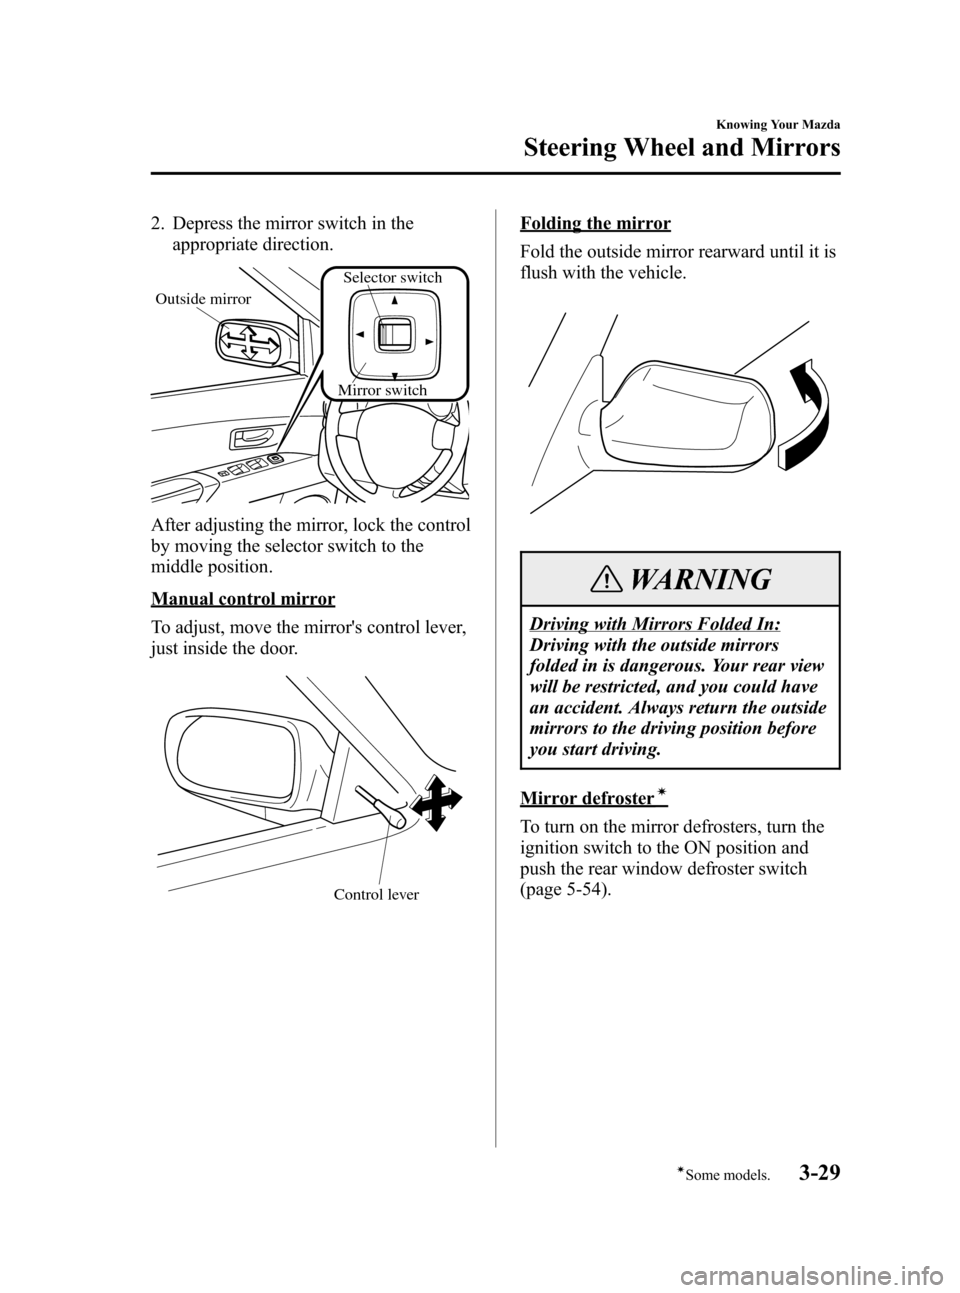 MAZDA MODEL 3 HATCHBACK 2006  Owners Manual (in English) Black plate (99,1)
2. Depress the mirror switch in the
appropriate direction.
Mirror switch
Outside mirror
Selector switch
After adjusting the mirror, lock the control
by moving the selector switch to